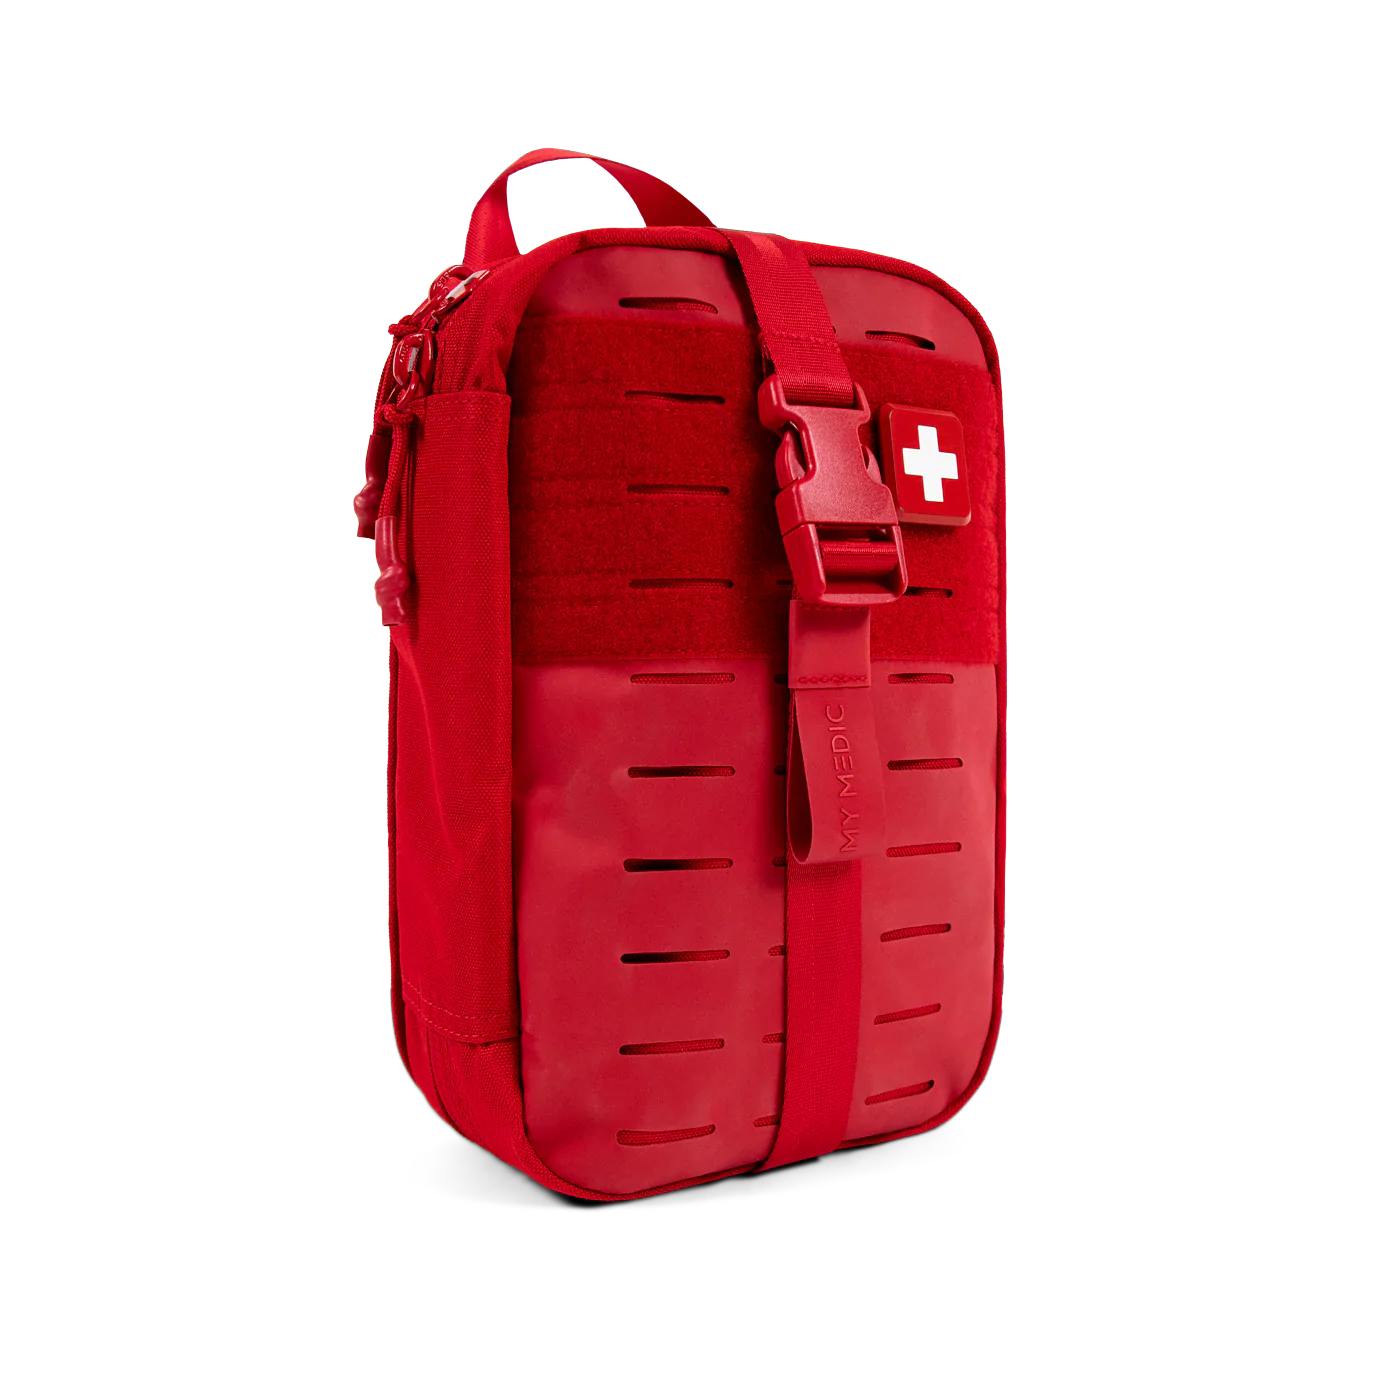 Mini OEM Survival First Aid Kit with Customized Accessories